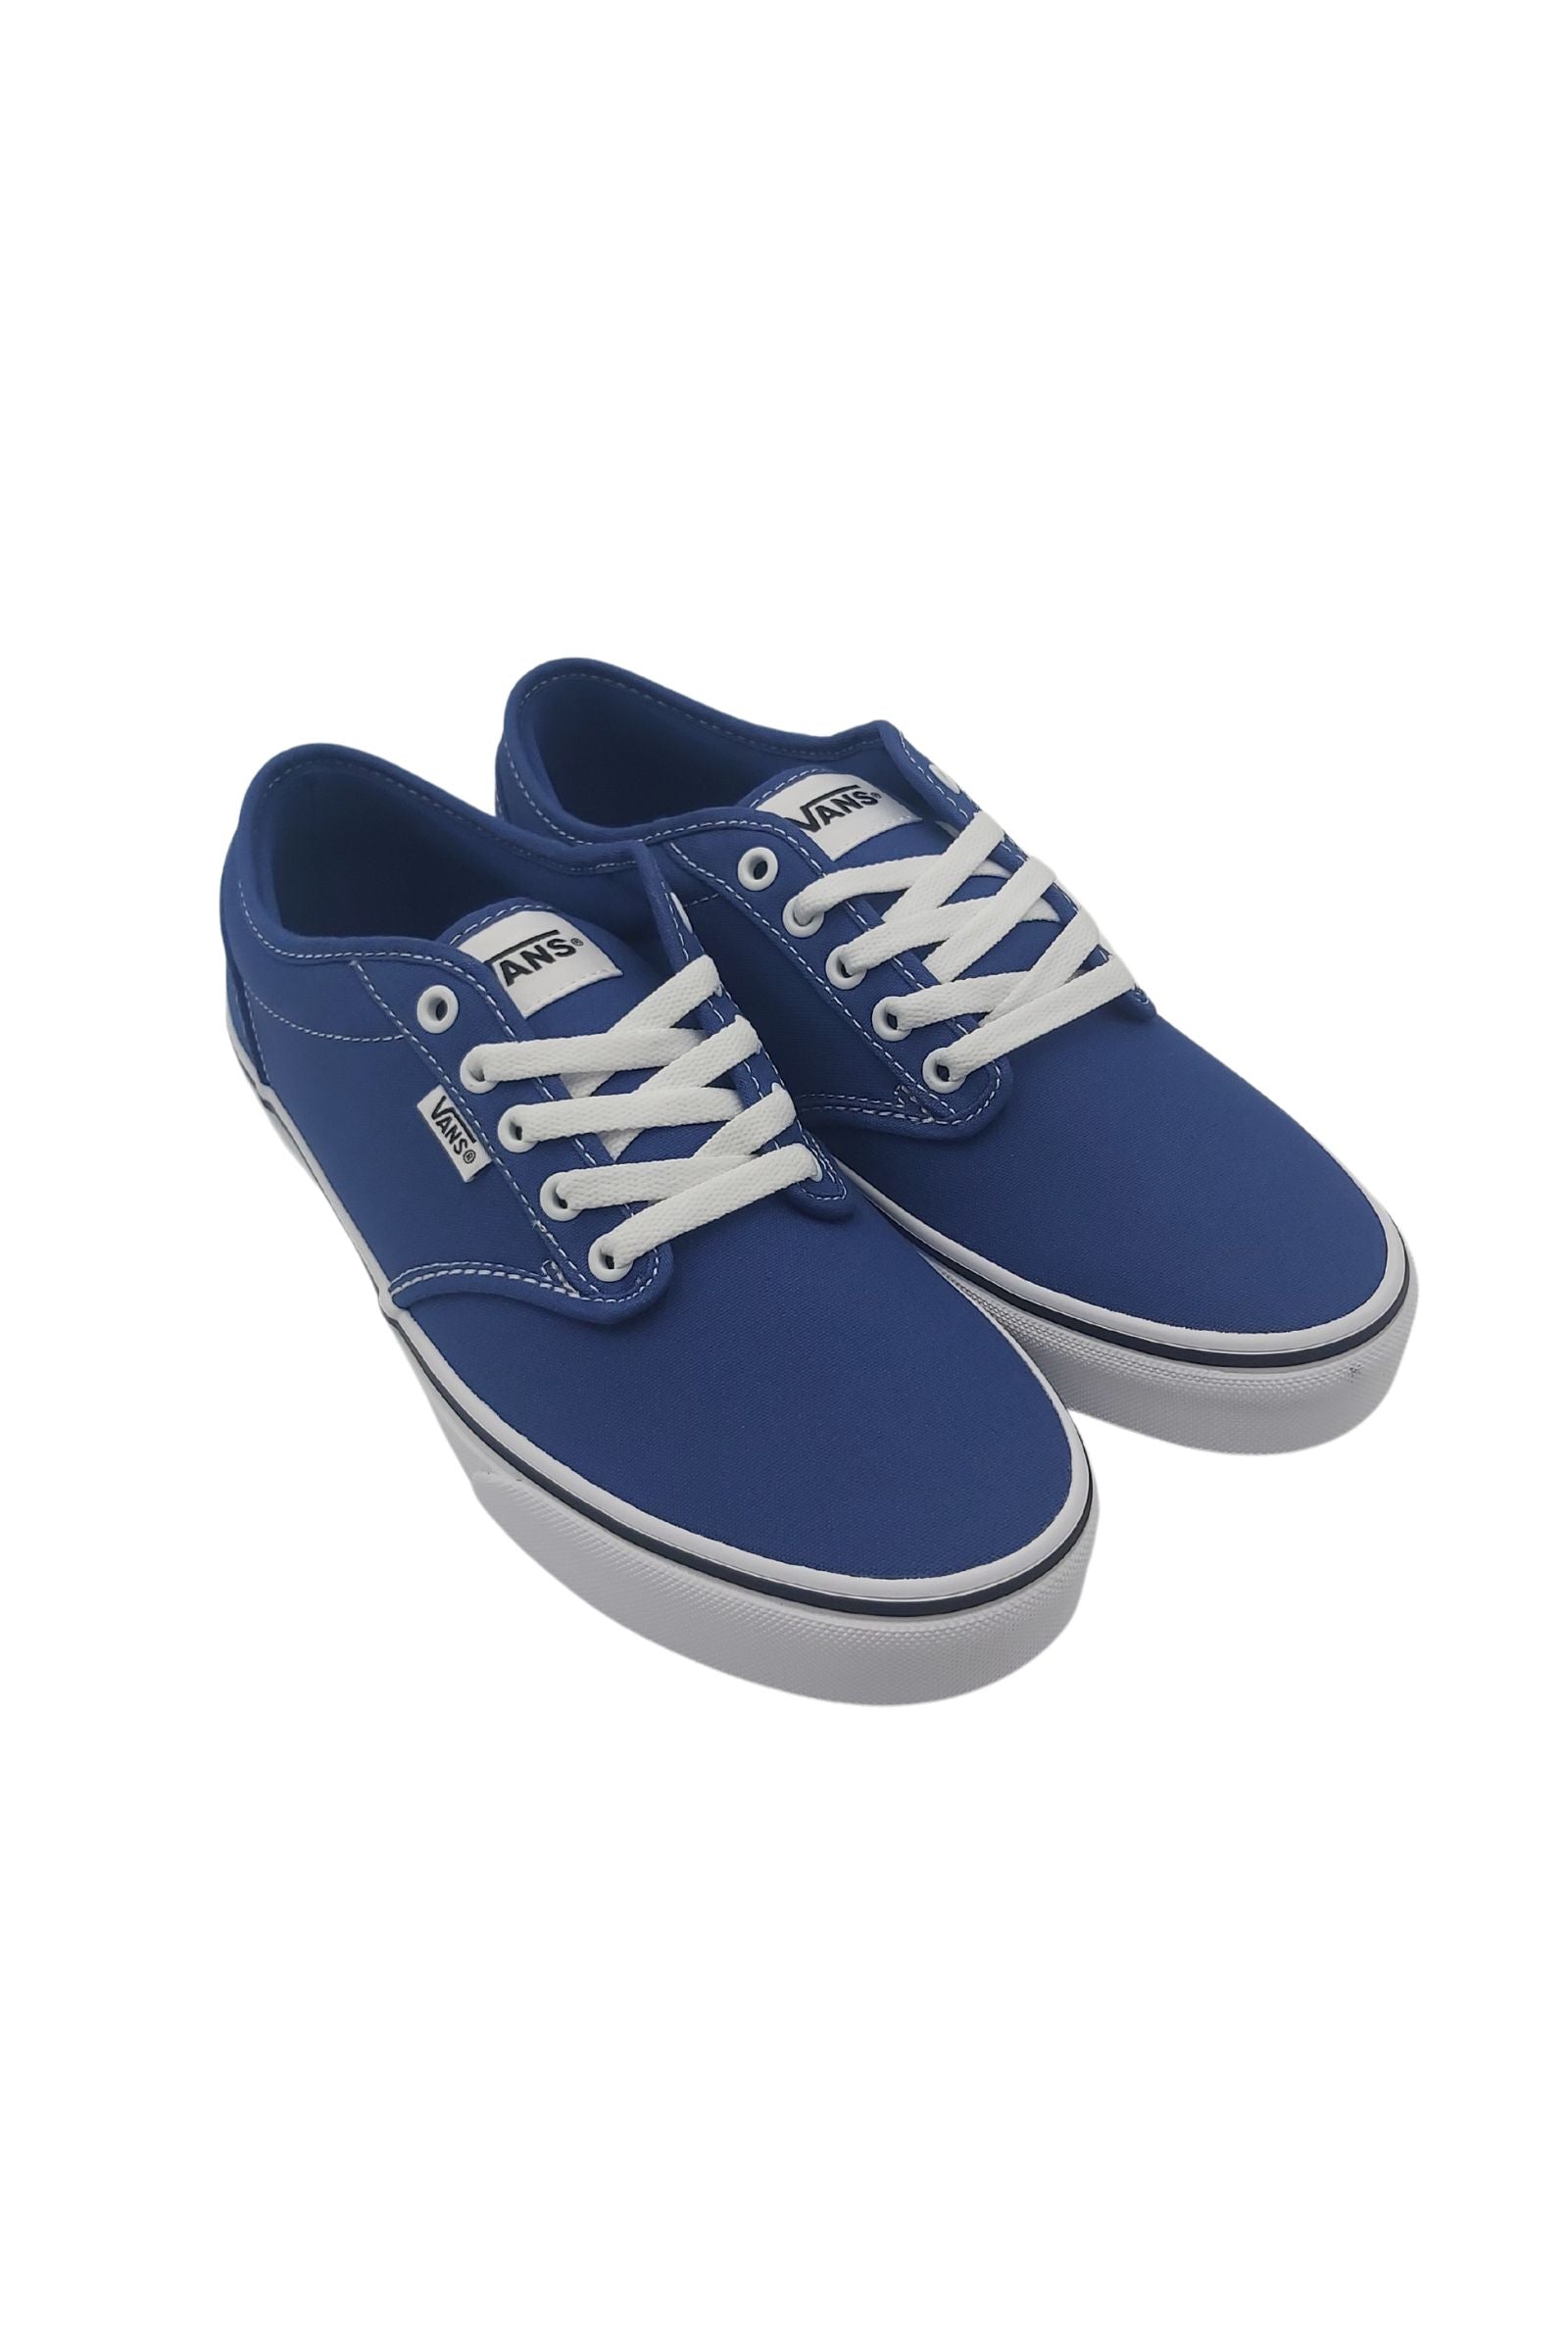 Mens Atwood Blue/White Sneaker-Side View 2